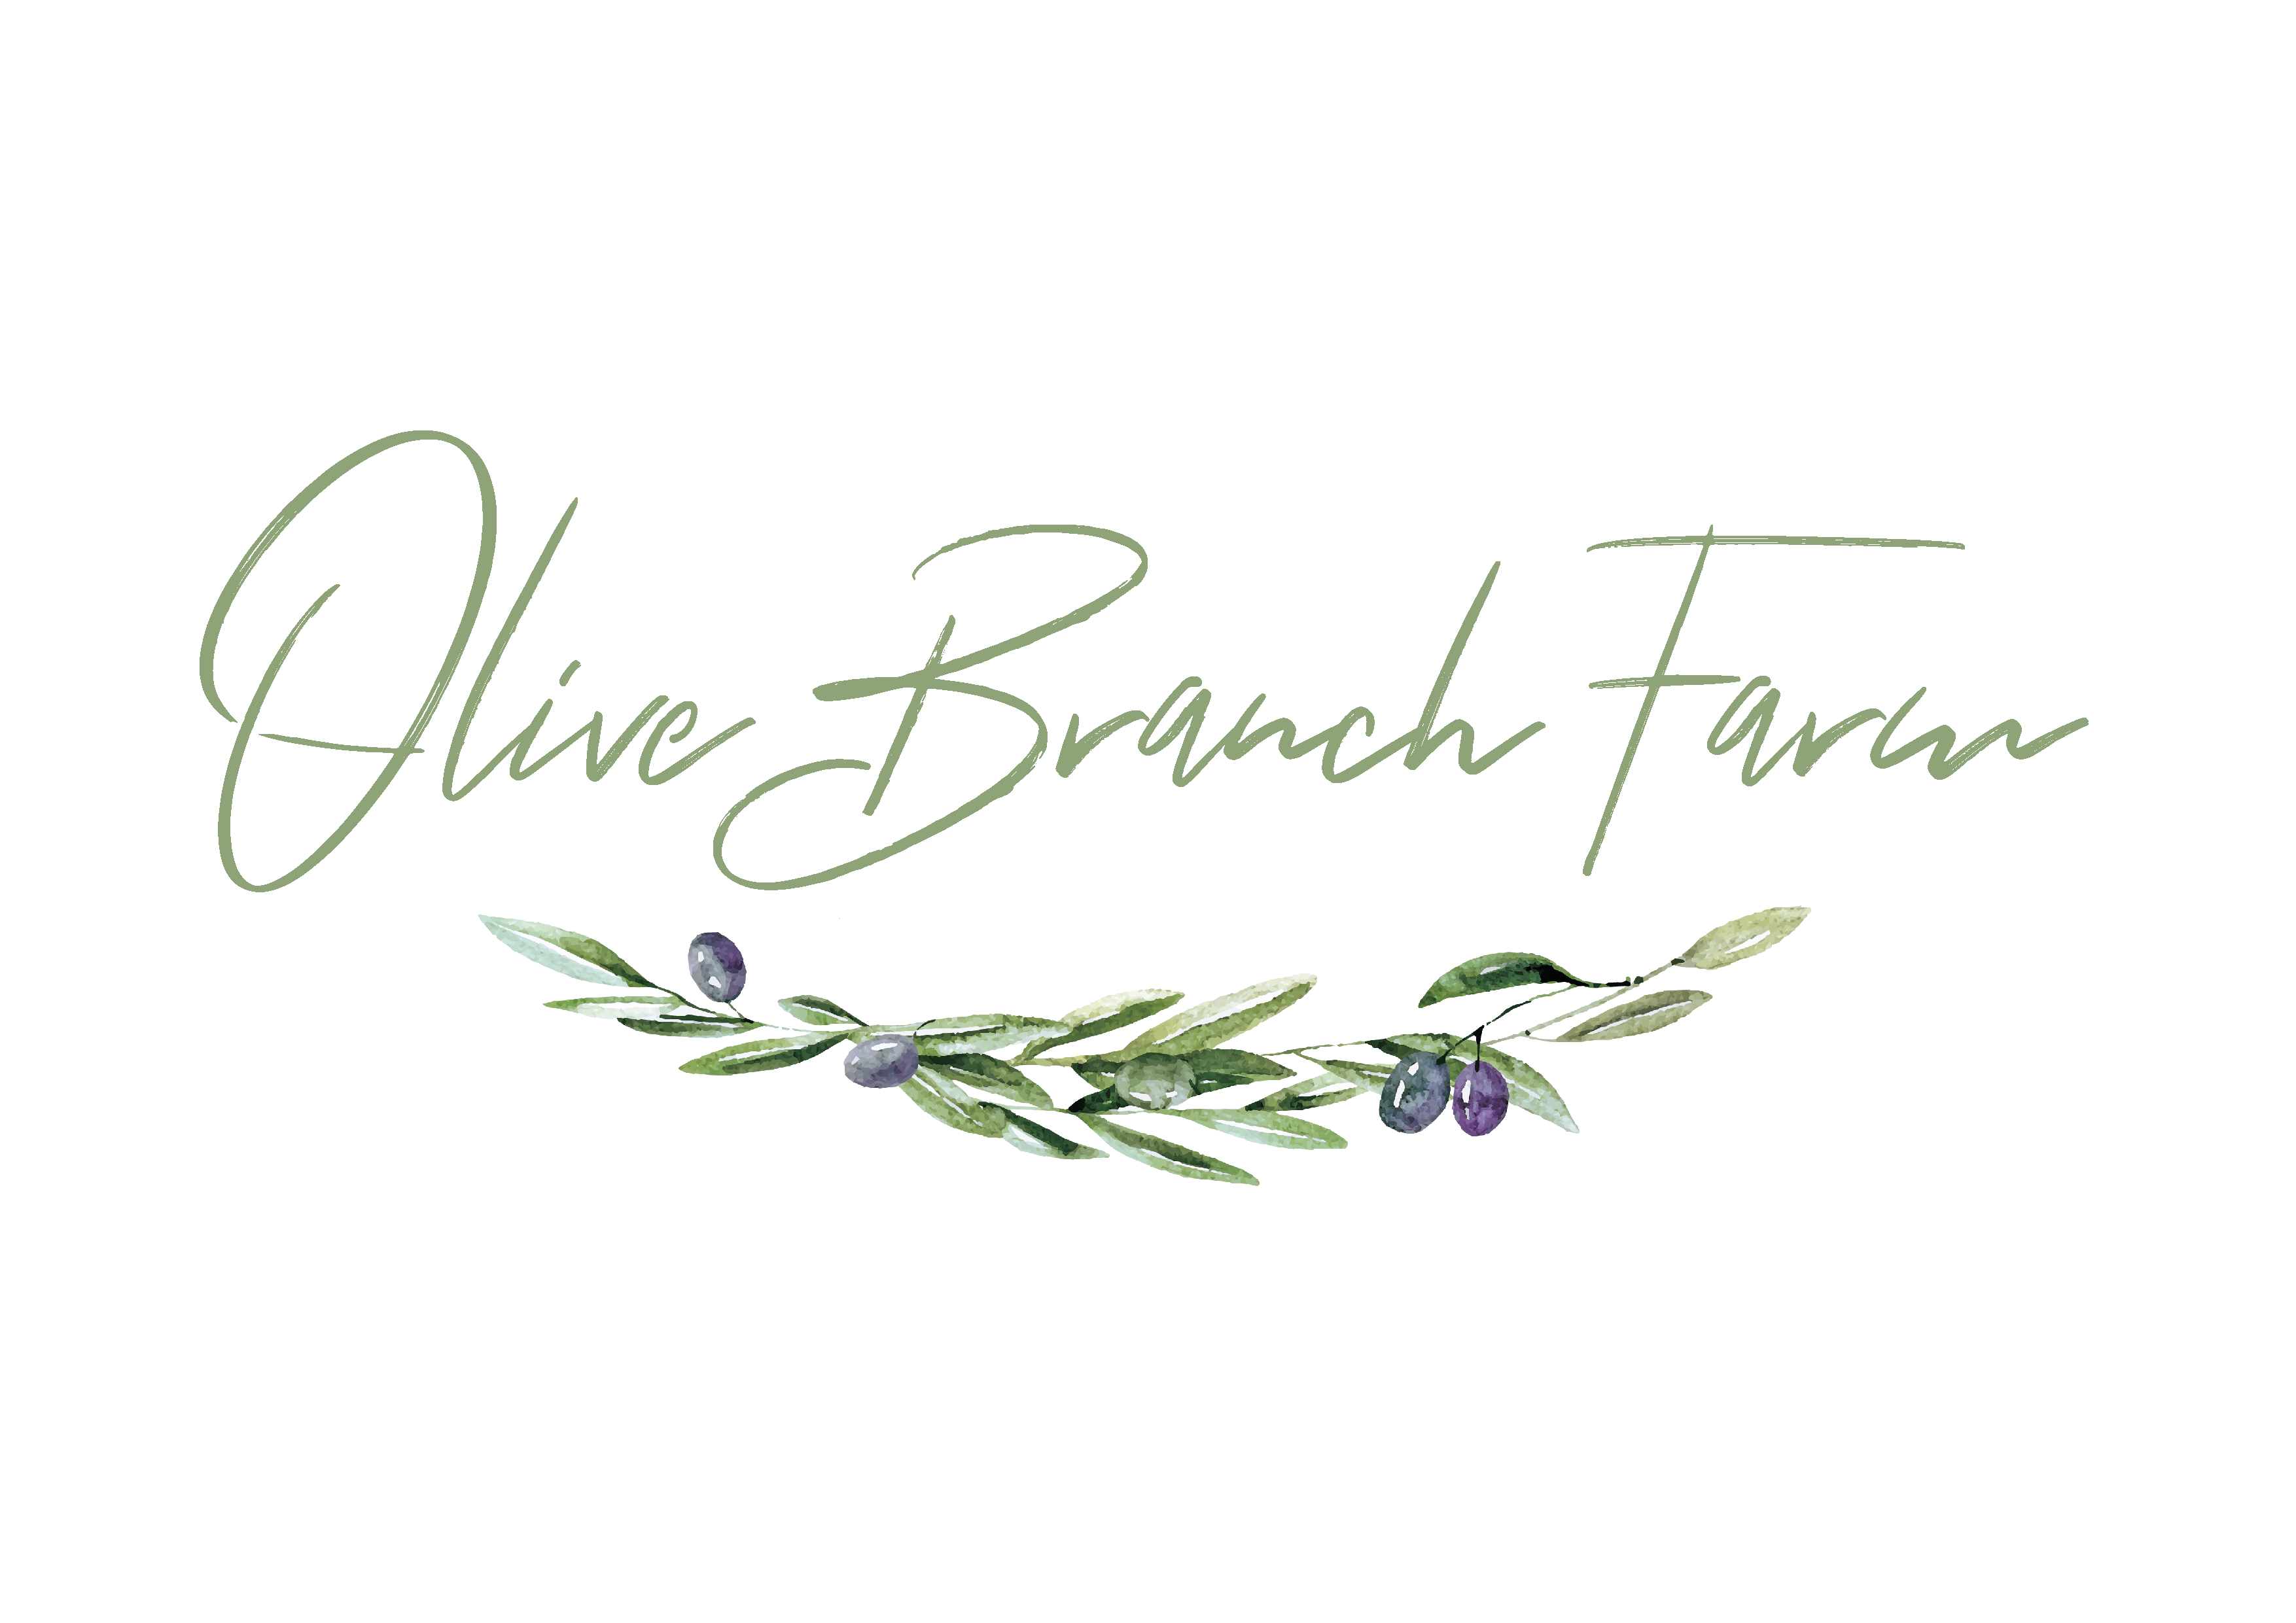 Click here for more information on our sponsor - Olive Branch Farm